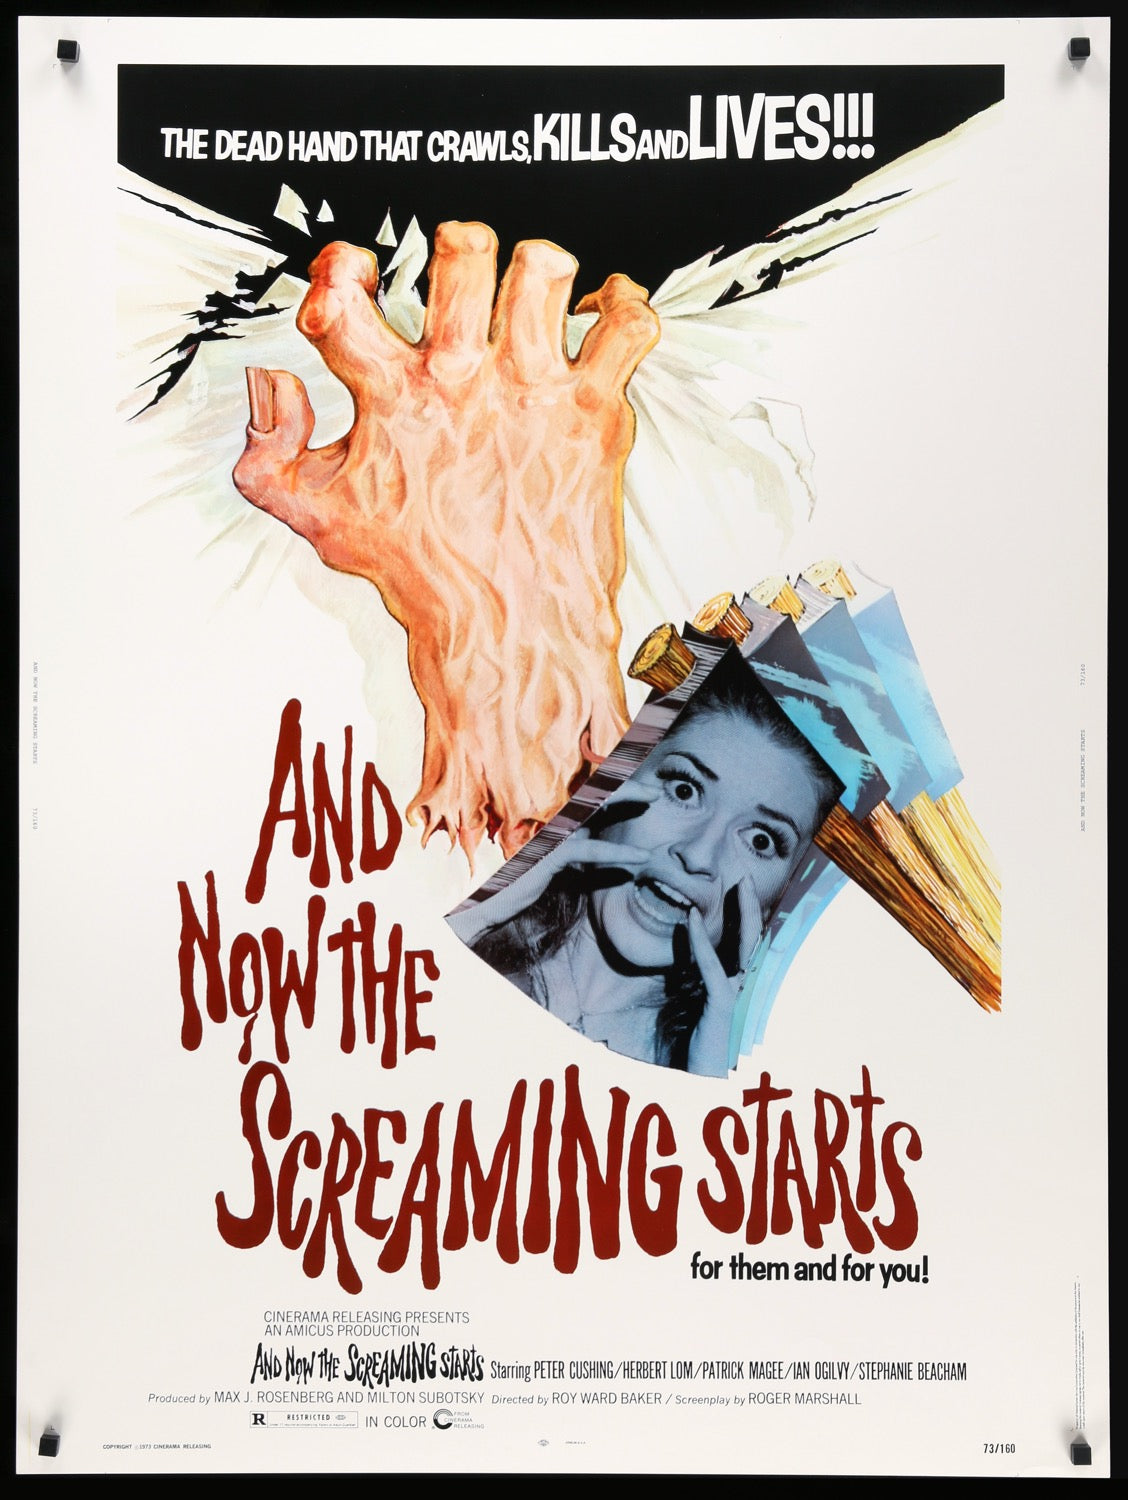 And Now the Screaming Starts (1973) original movie poster for sale at Original Film Art